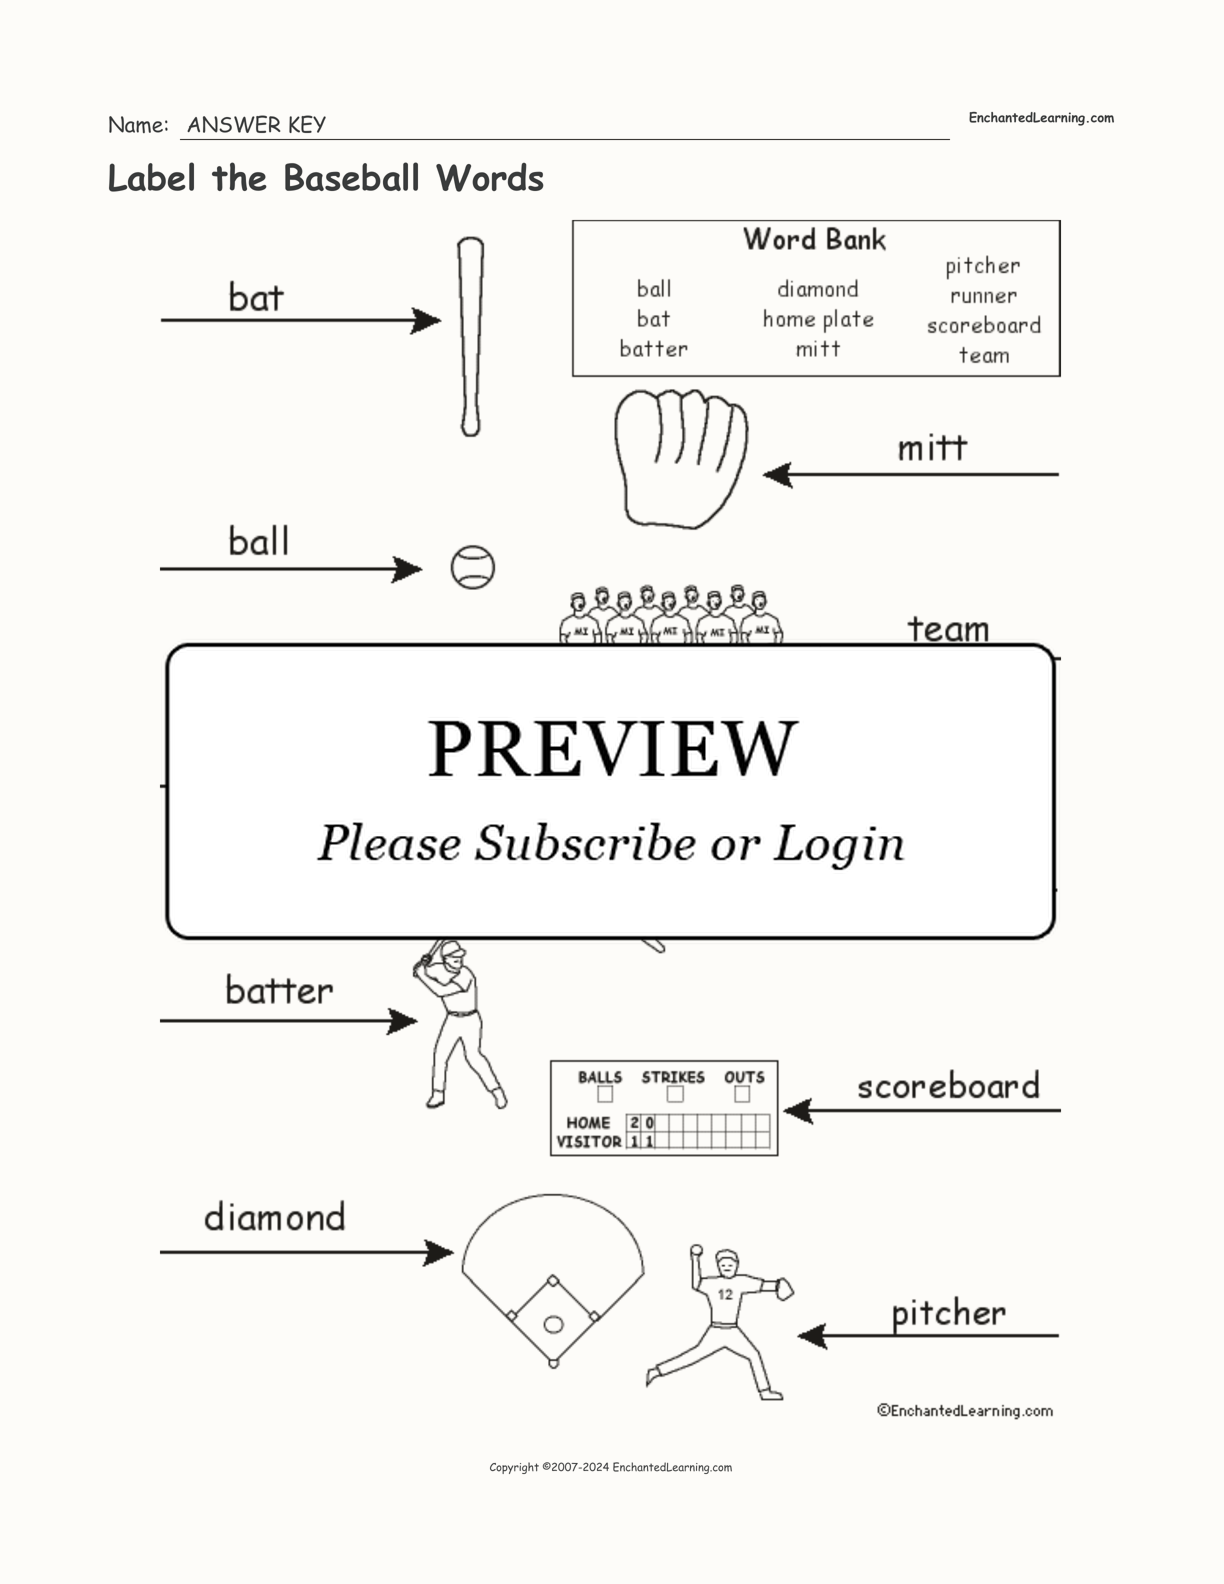 Label the Baseball Words interactive worksheet page 2